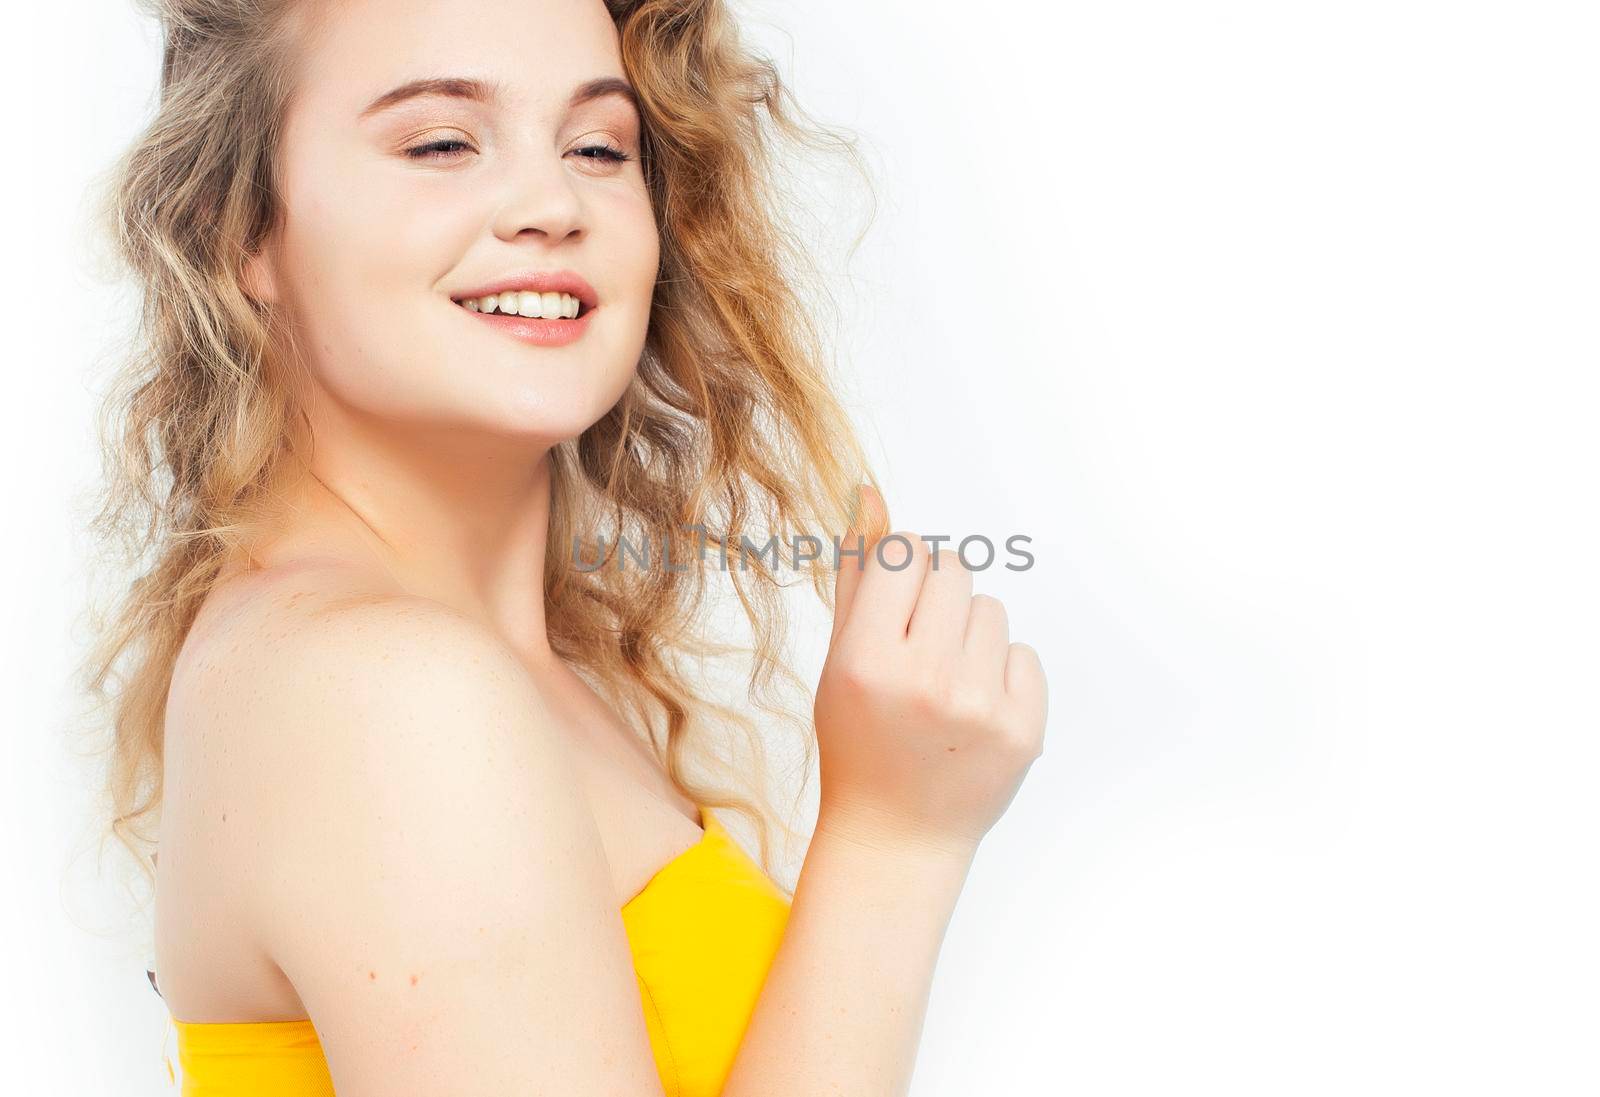 oung pretty blond girl posing happy smiling on white background isolated, lifestyle people concept by JordanJ